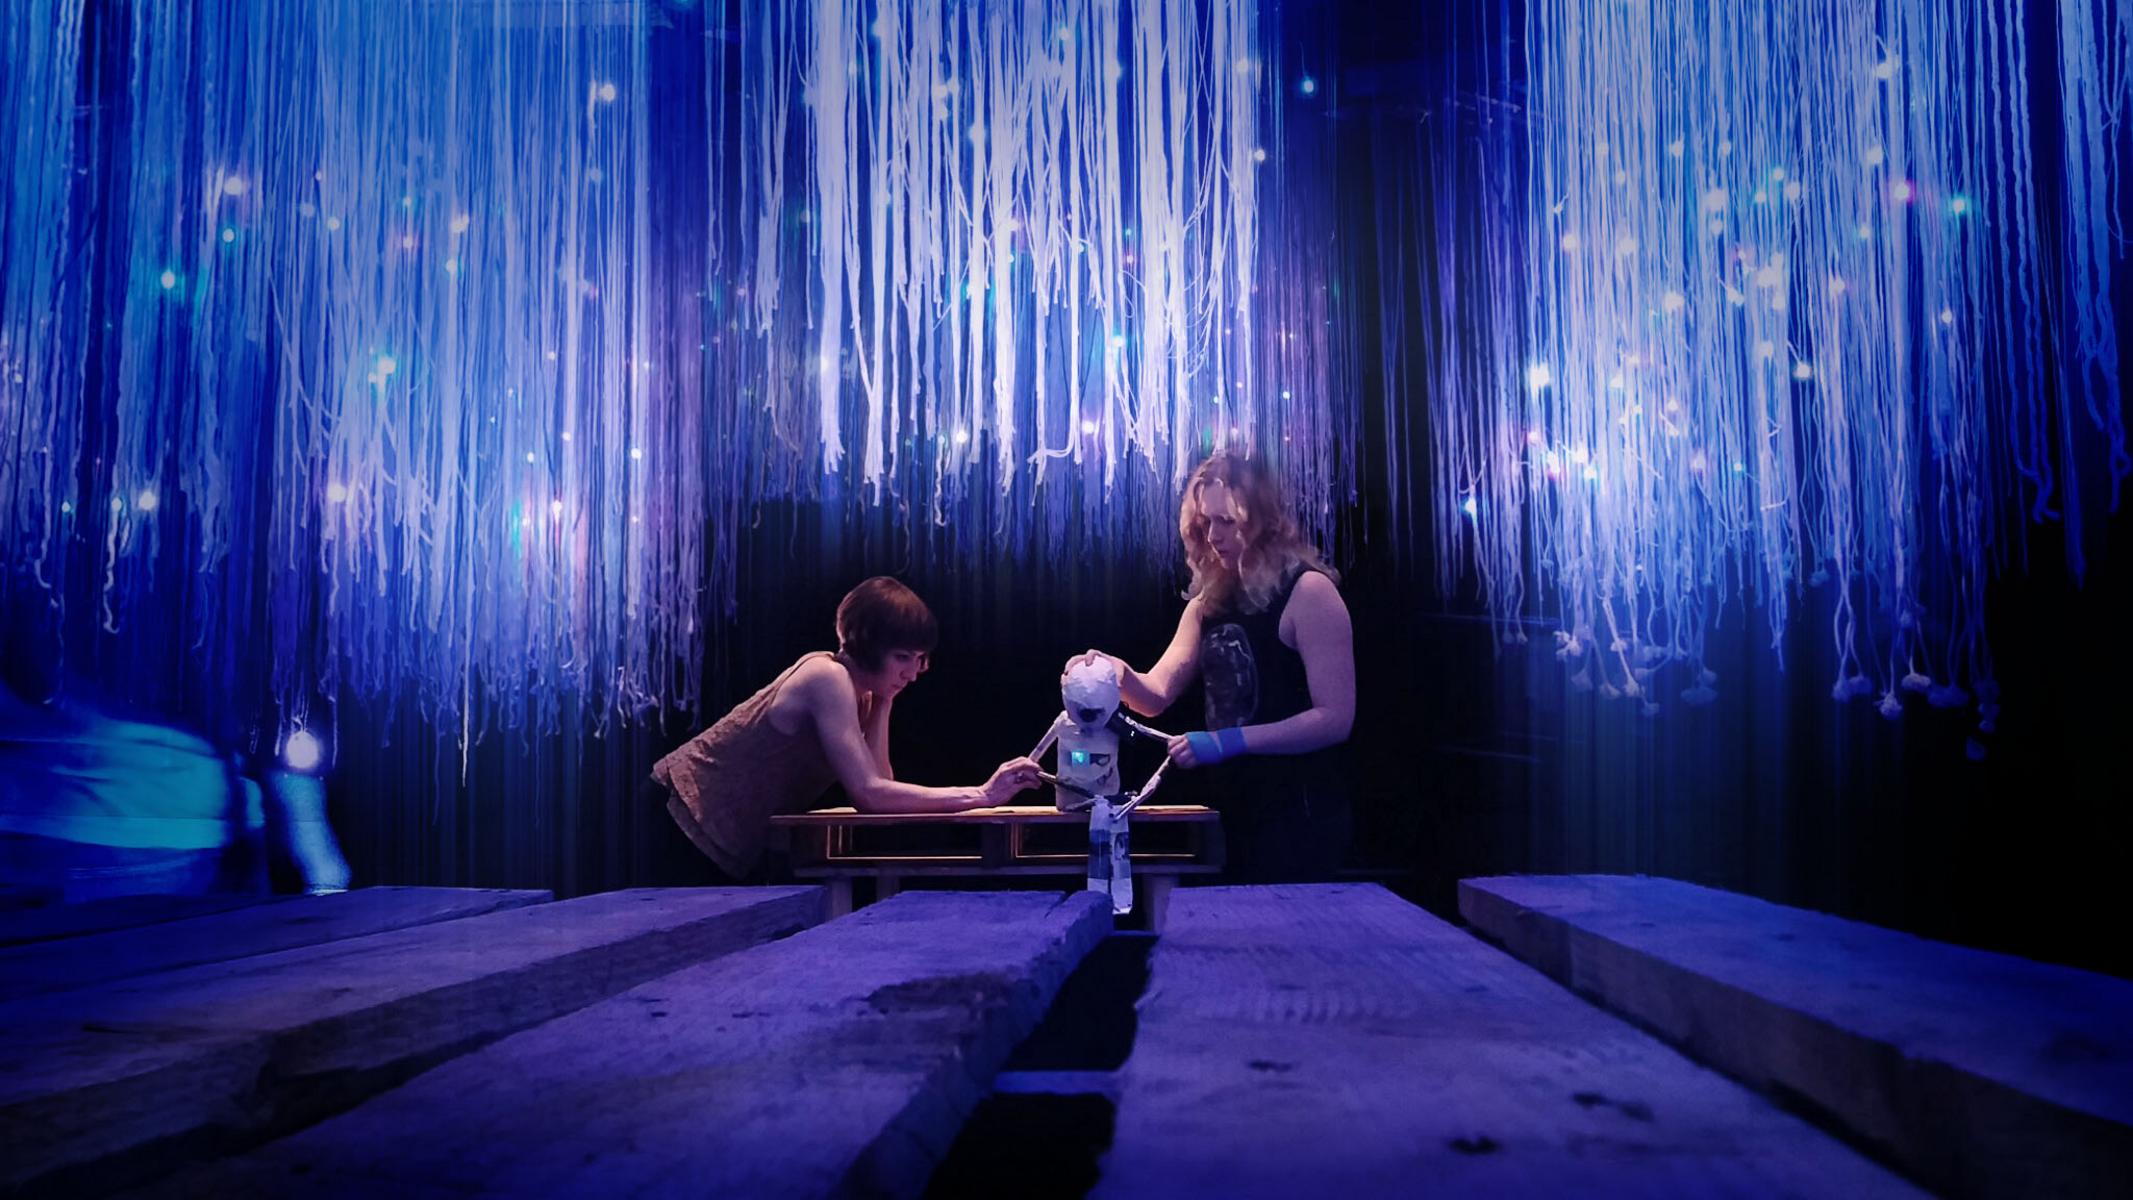 Two puppeteers rehearse with a white puppet seated on a shipping pallet table. Suspended above are shipping pallets from which string and points of light hang.